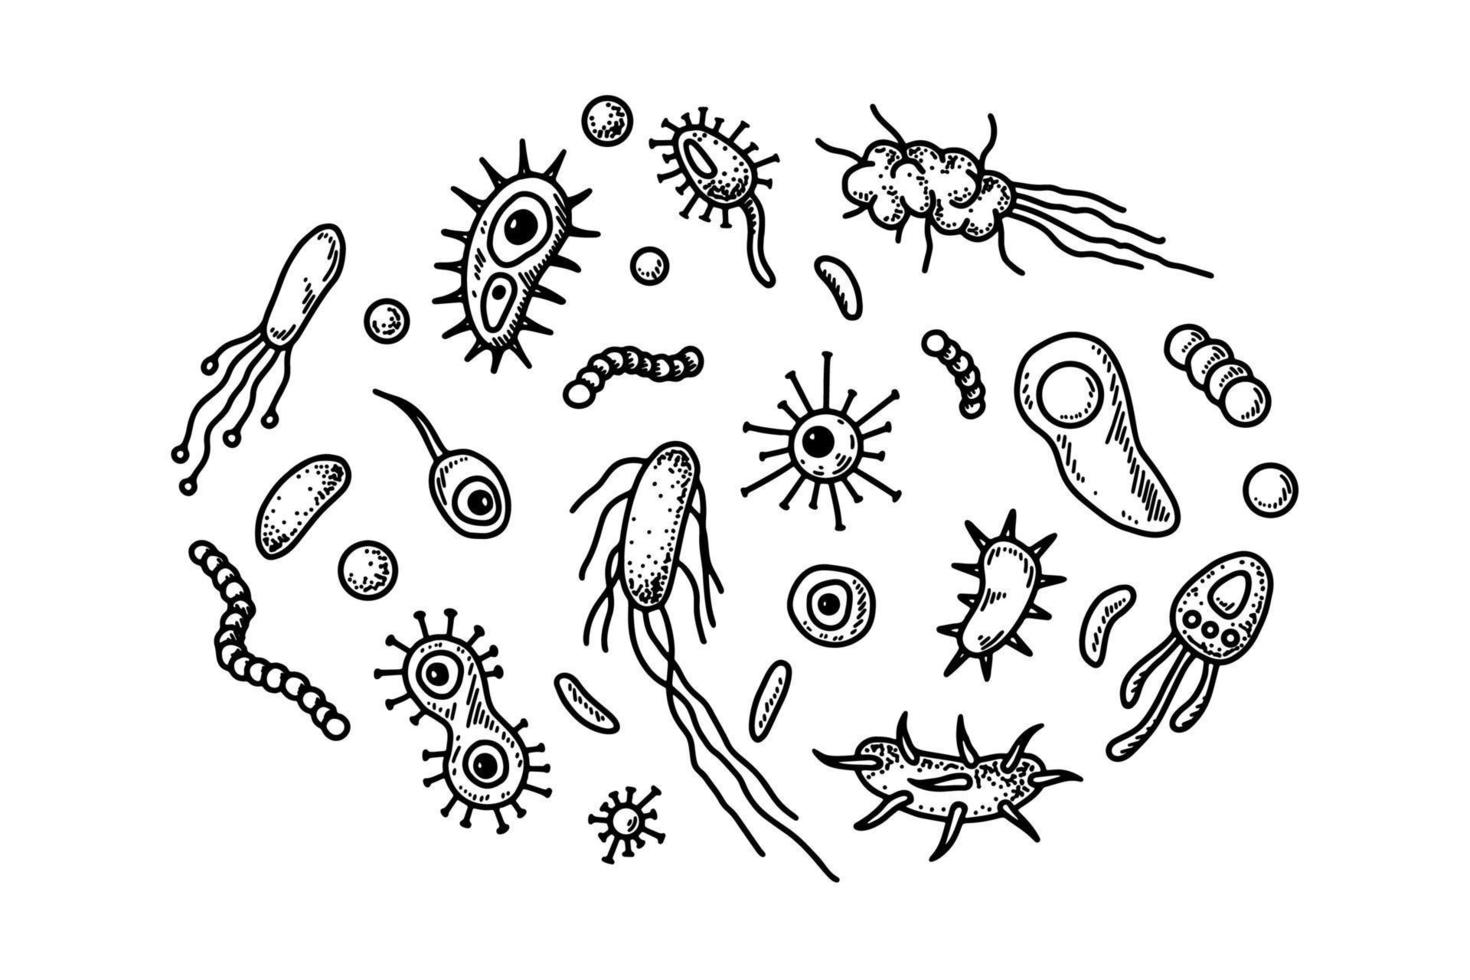 Set of hand drawn bacterias and microorganisms. Vector illustration in sketch style. Realistic microbiology scientific design